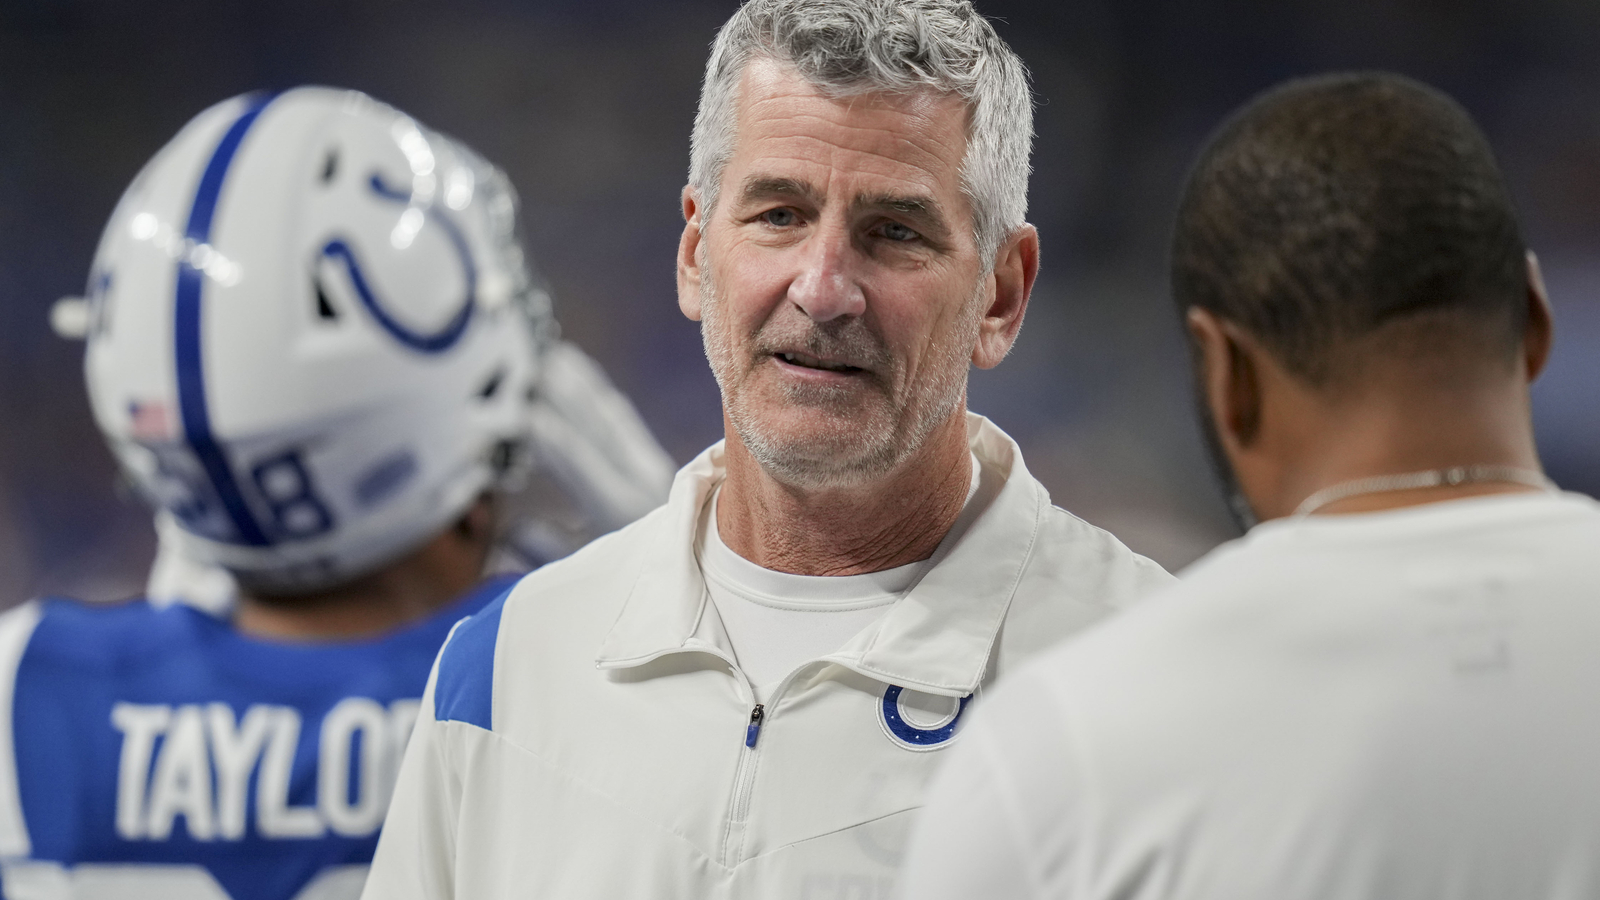 How does the Panthers’ hiring of Frank Reich affect the Falcons?